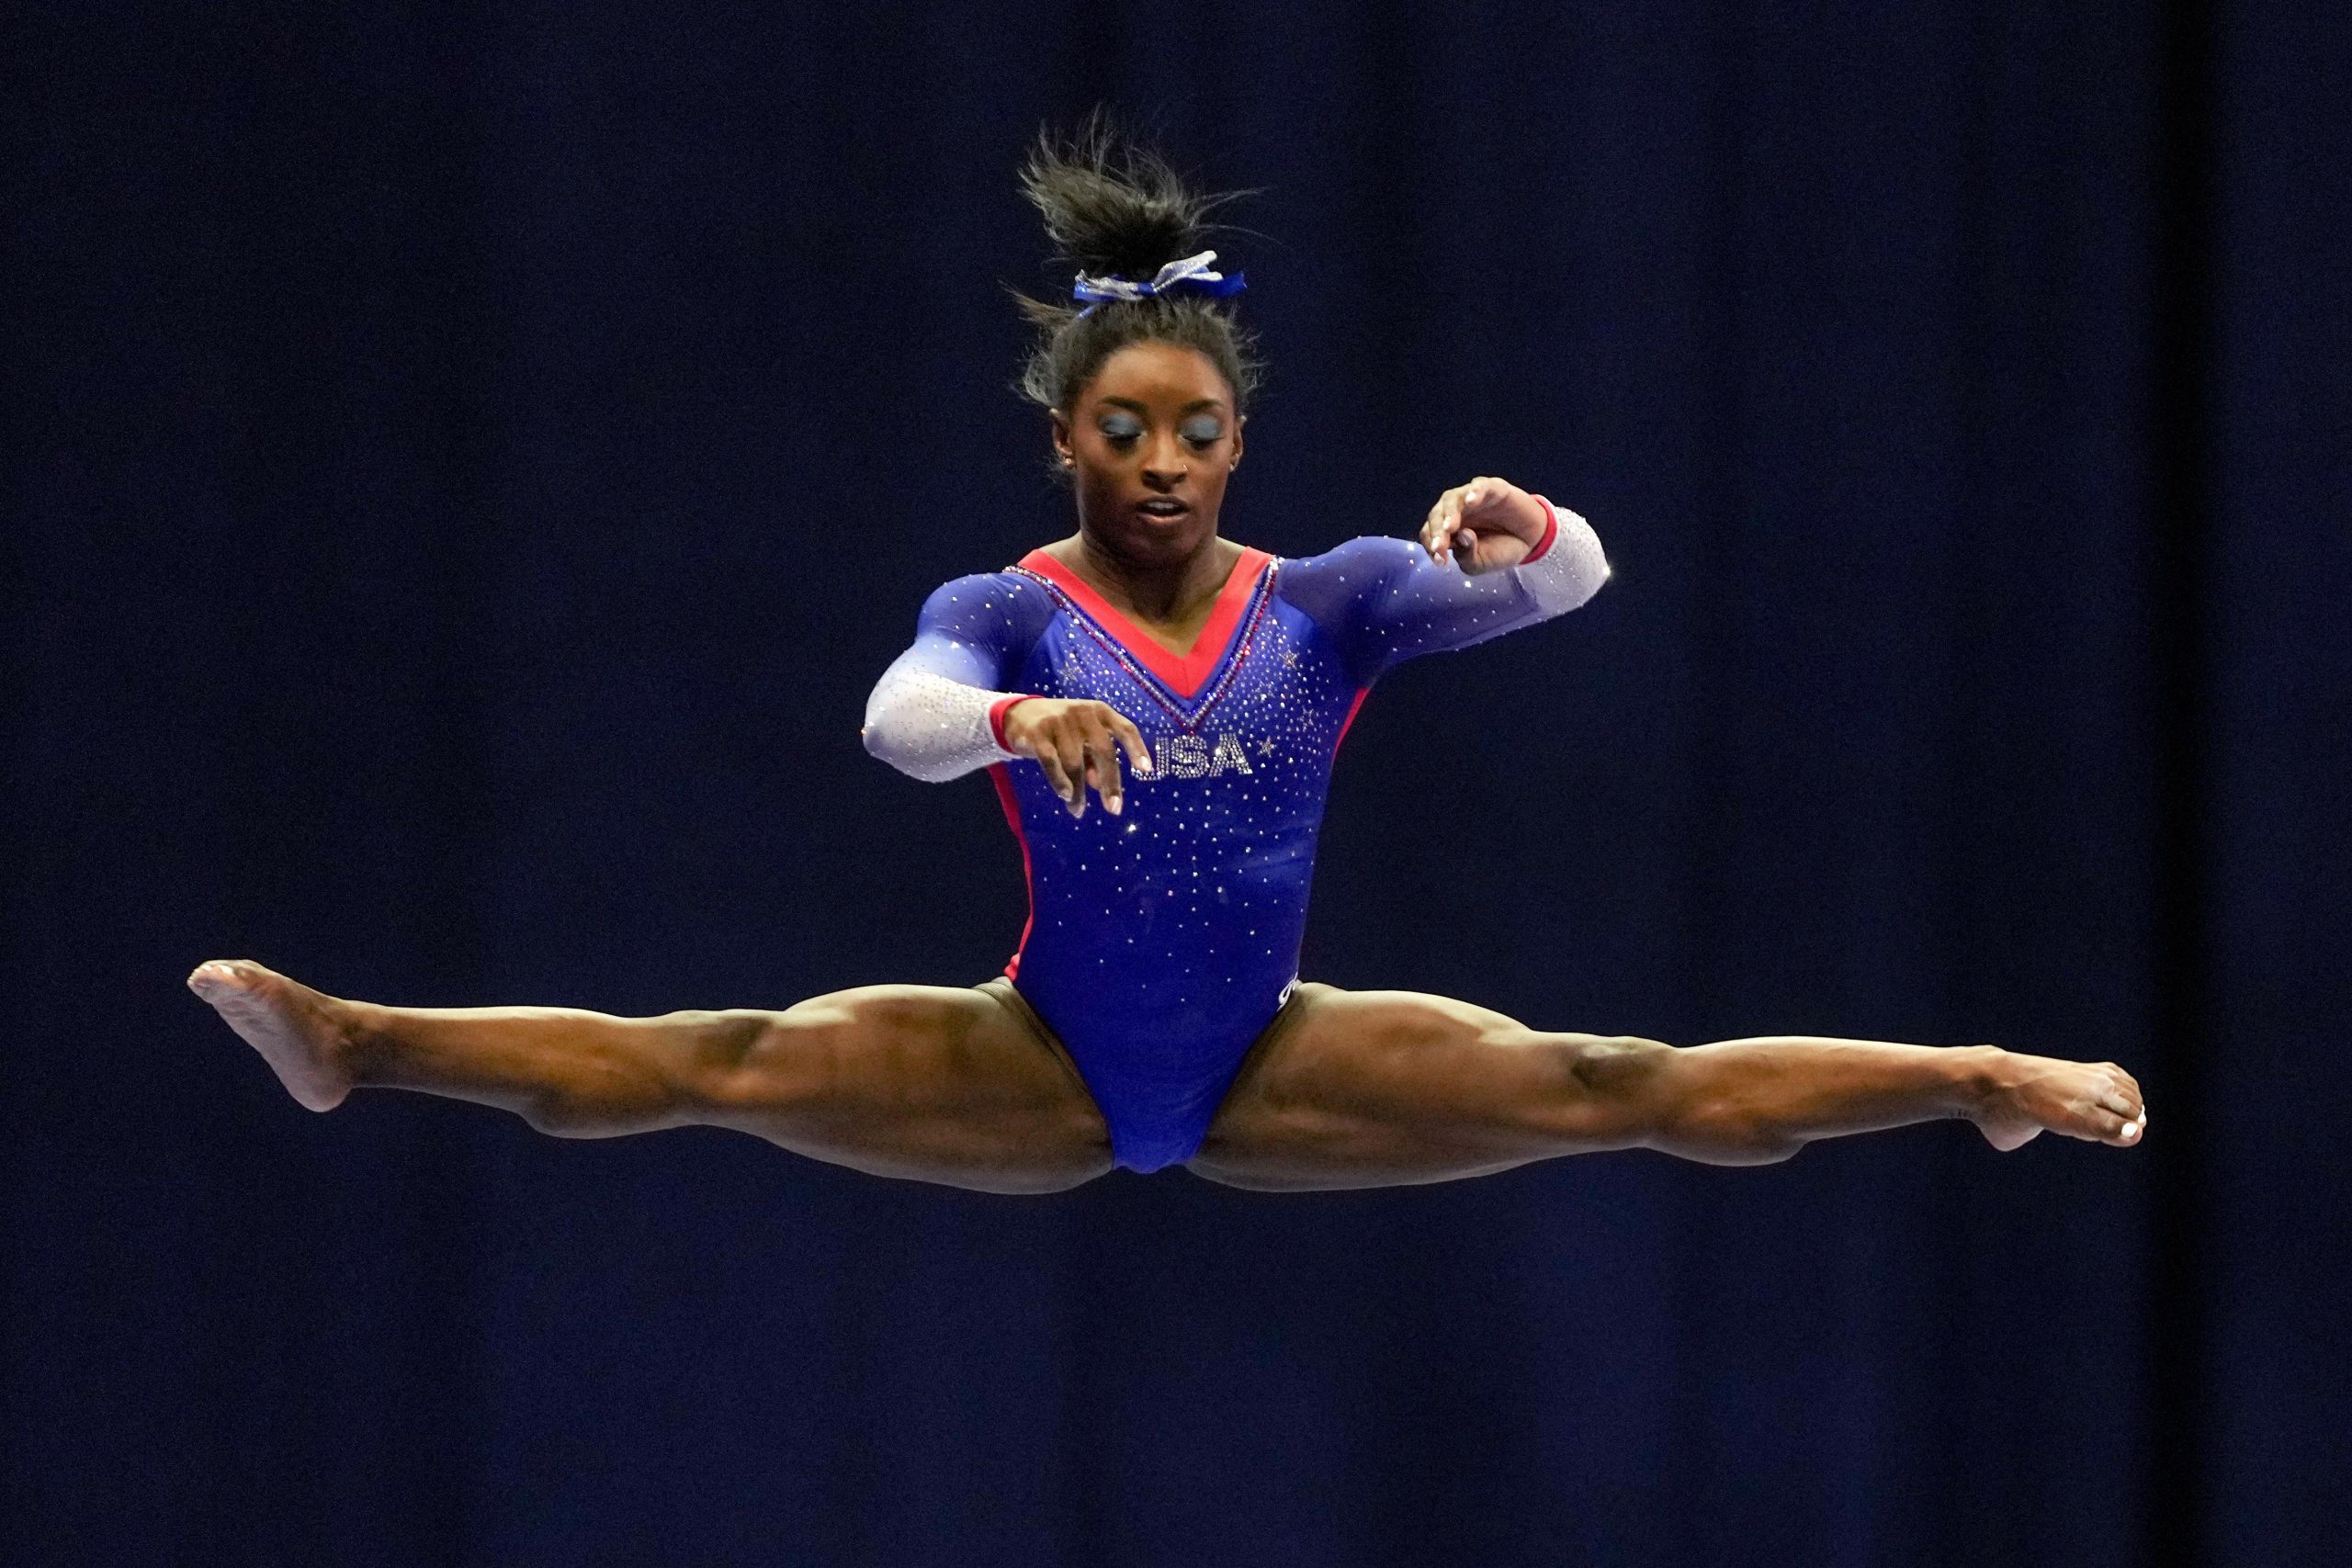 Olympic champion Simone Biles out of team finals with apparent injury